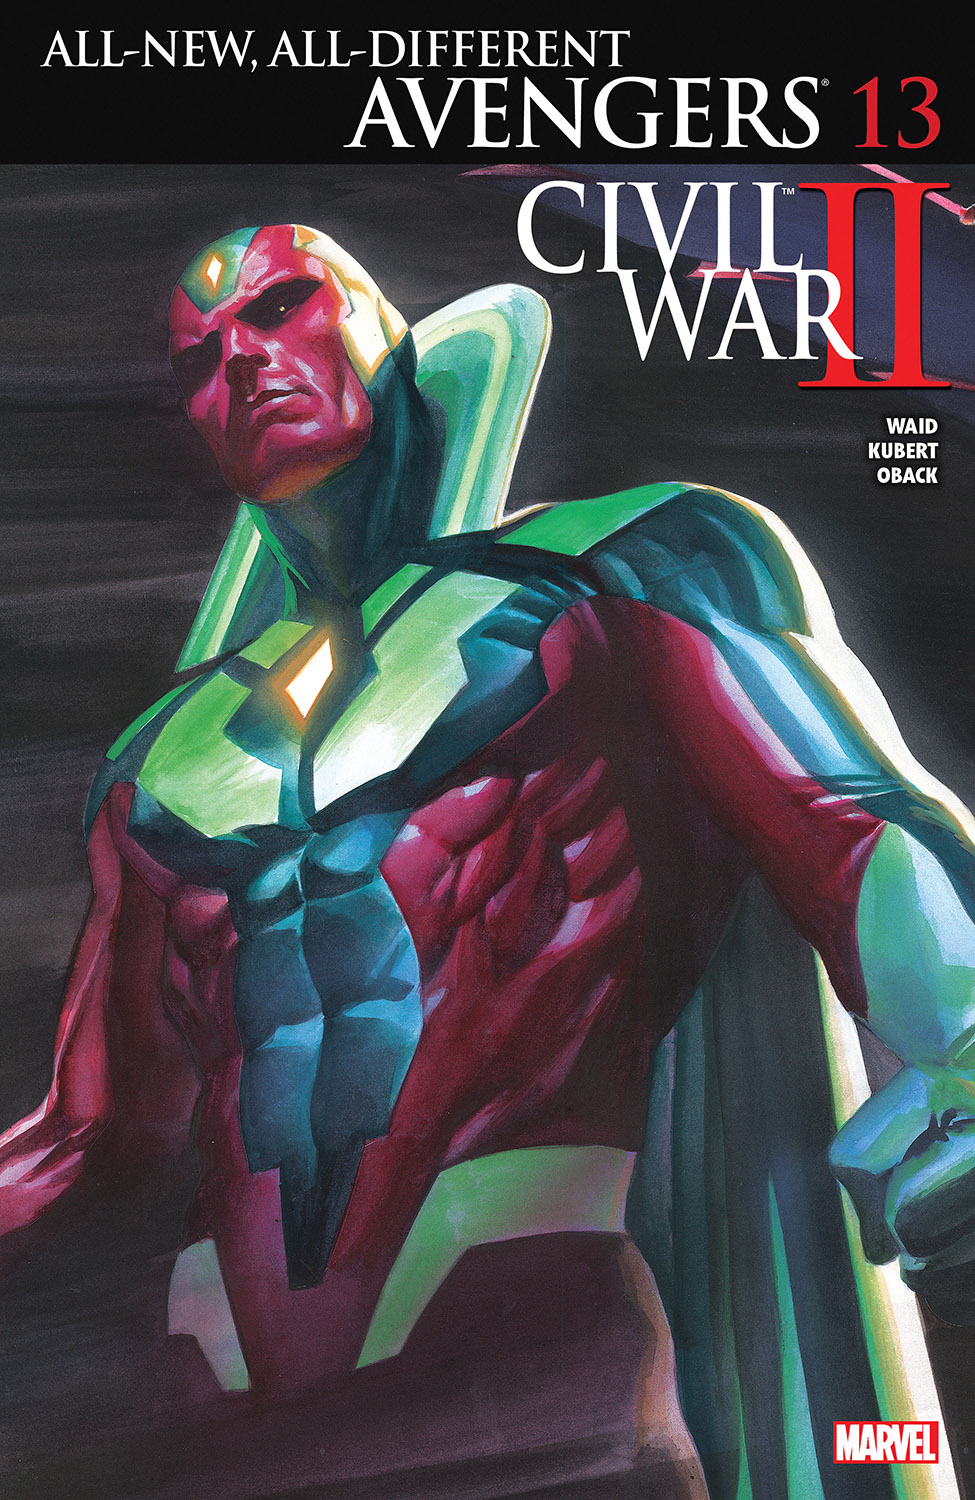 All-New, All-Different Avengers (2015) #13